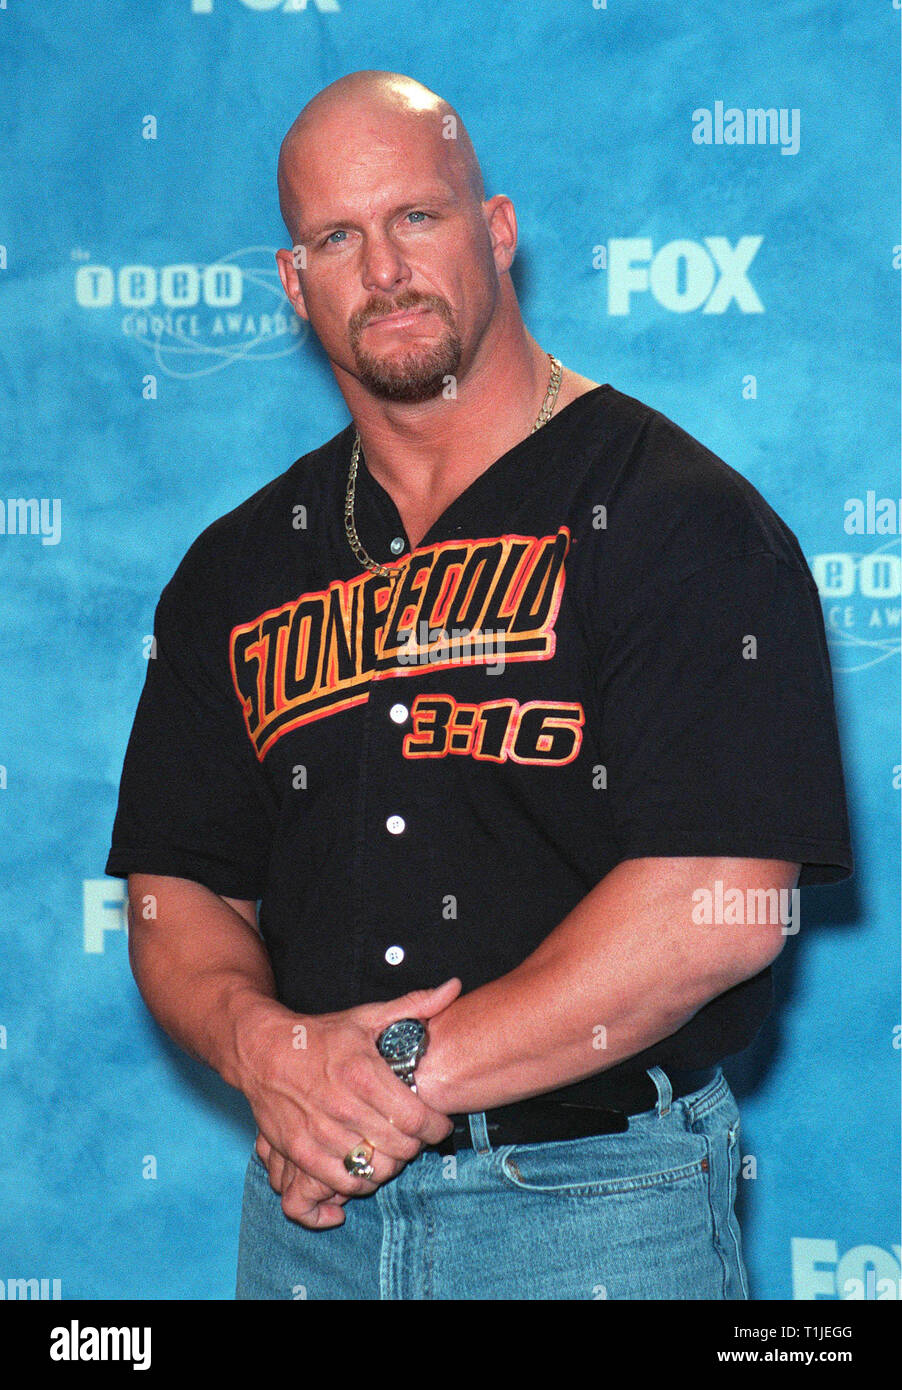 LOS ANGELES, CA - August 1, 1999:  Professional wrestler STEVE 'STONE COLD' AUSTIN at the 1999 Teen Choice Awards, in Santa Monica. © Paul Smith / Featureflash Stock Photo